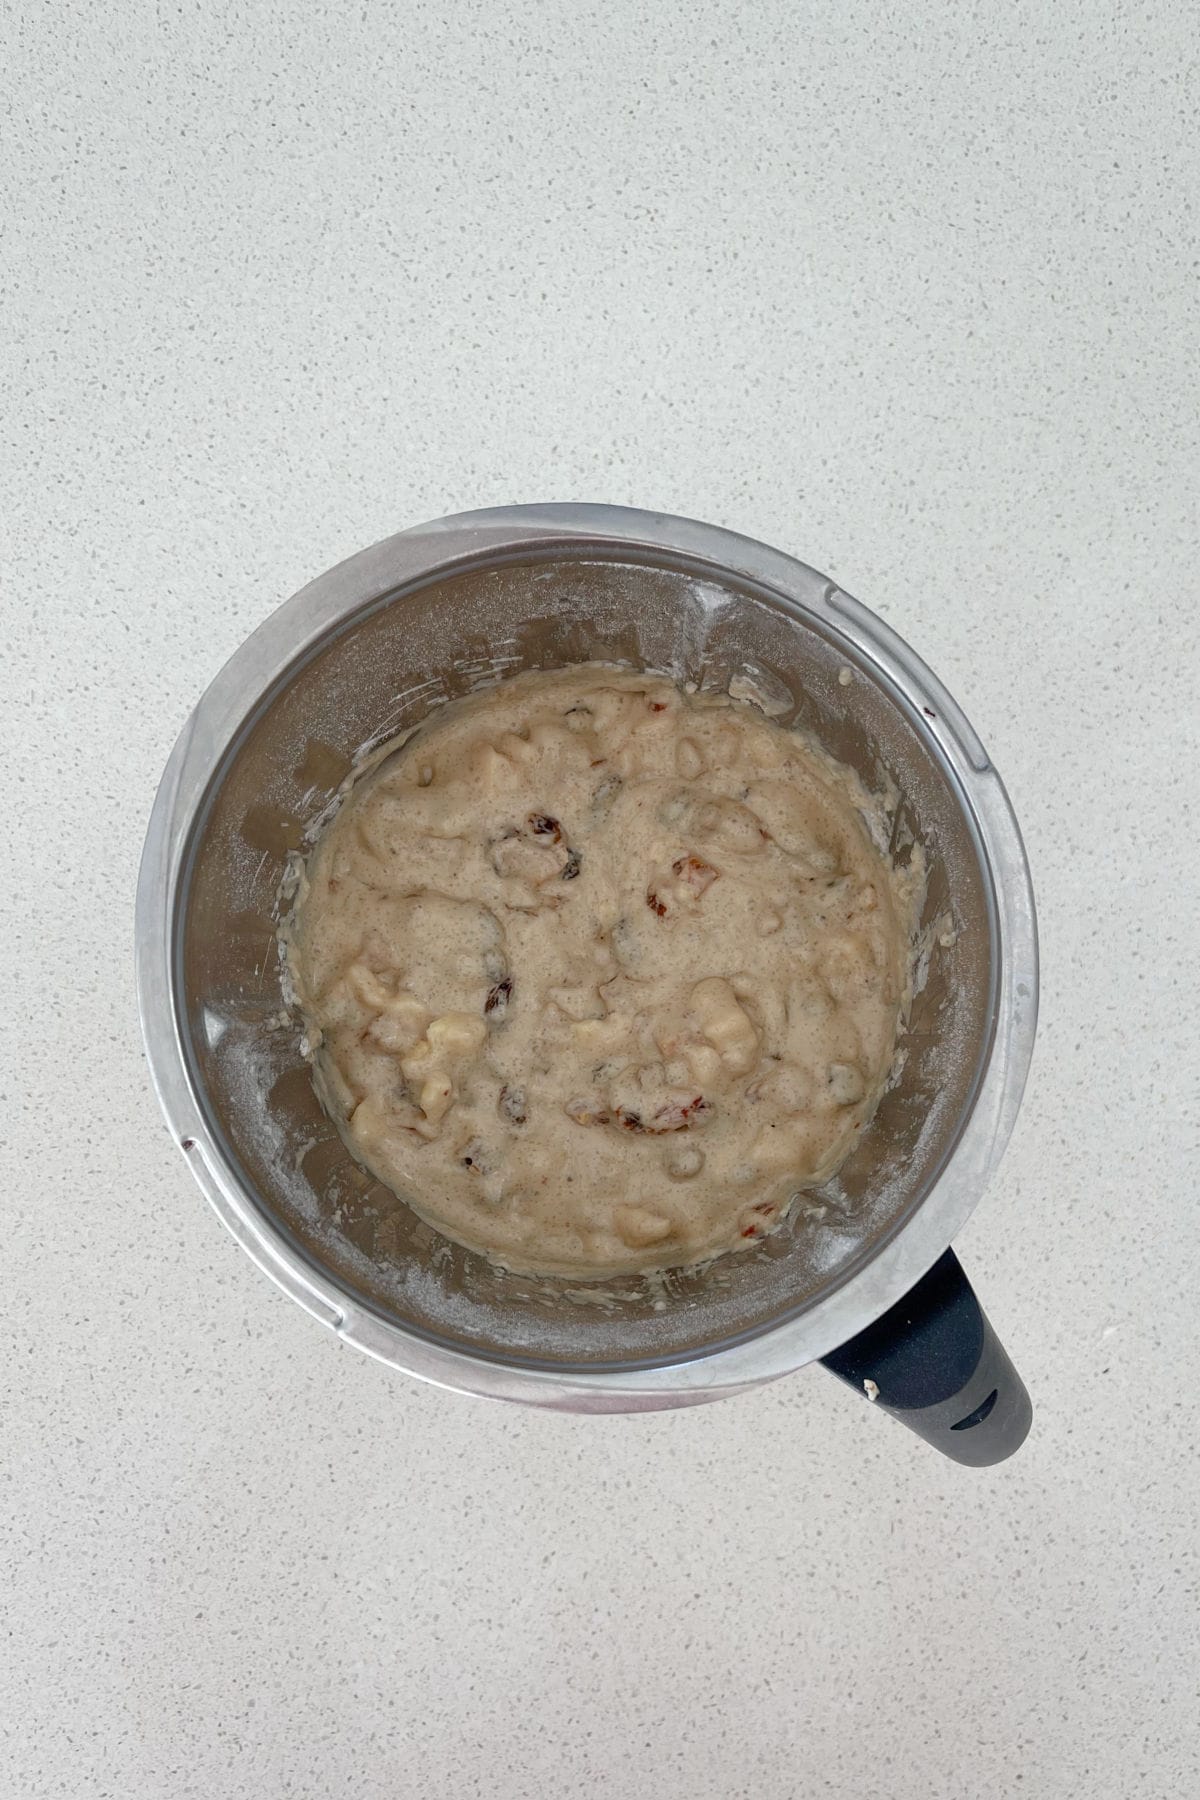 Fruit Loaf mixture in a thermomix bowl.